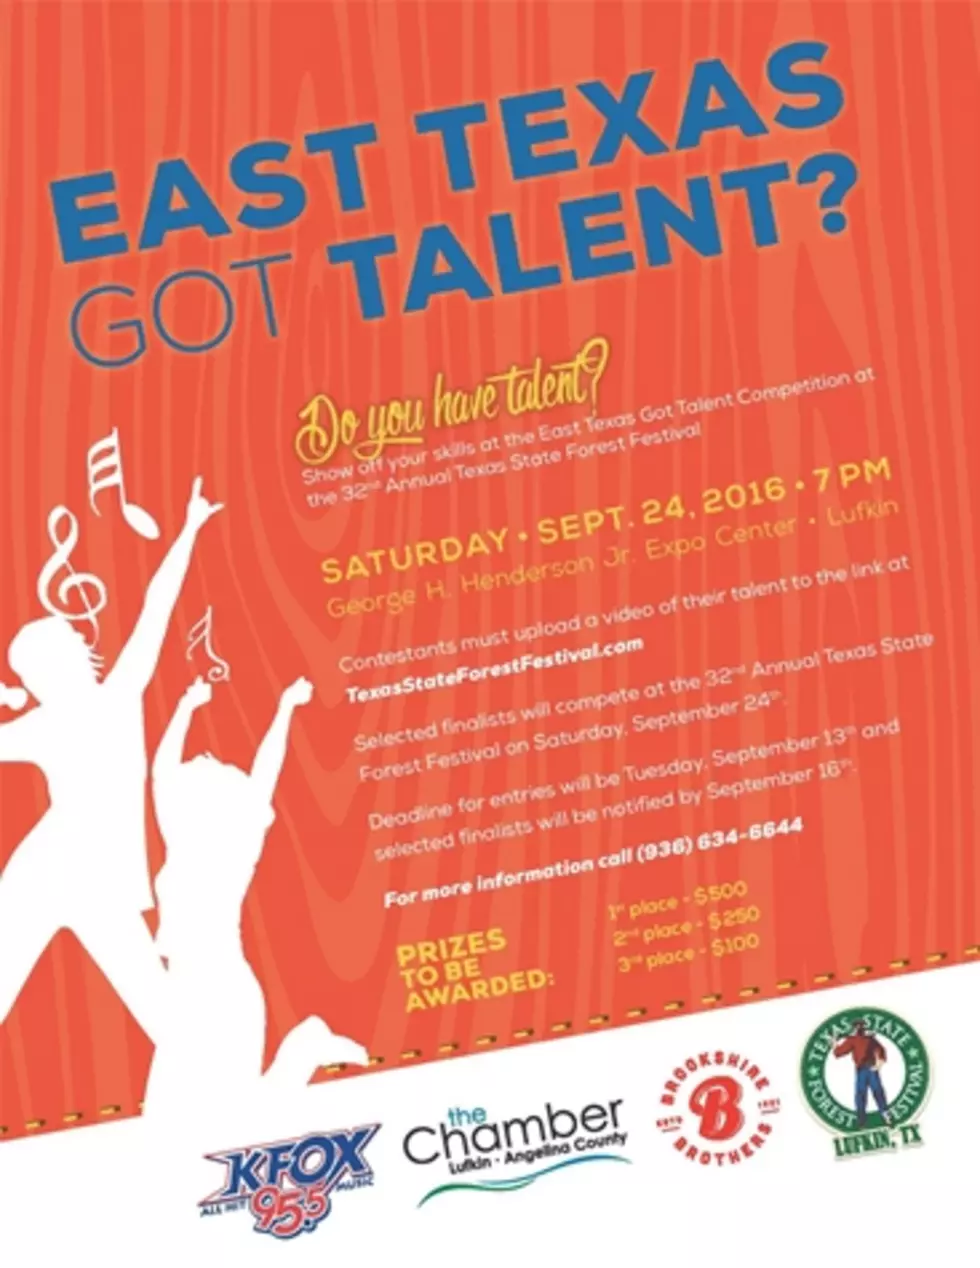 Show Us What You Got! – East Texas Got Talent Is Back For 2016